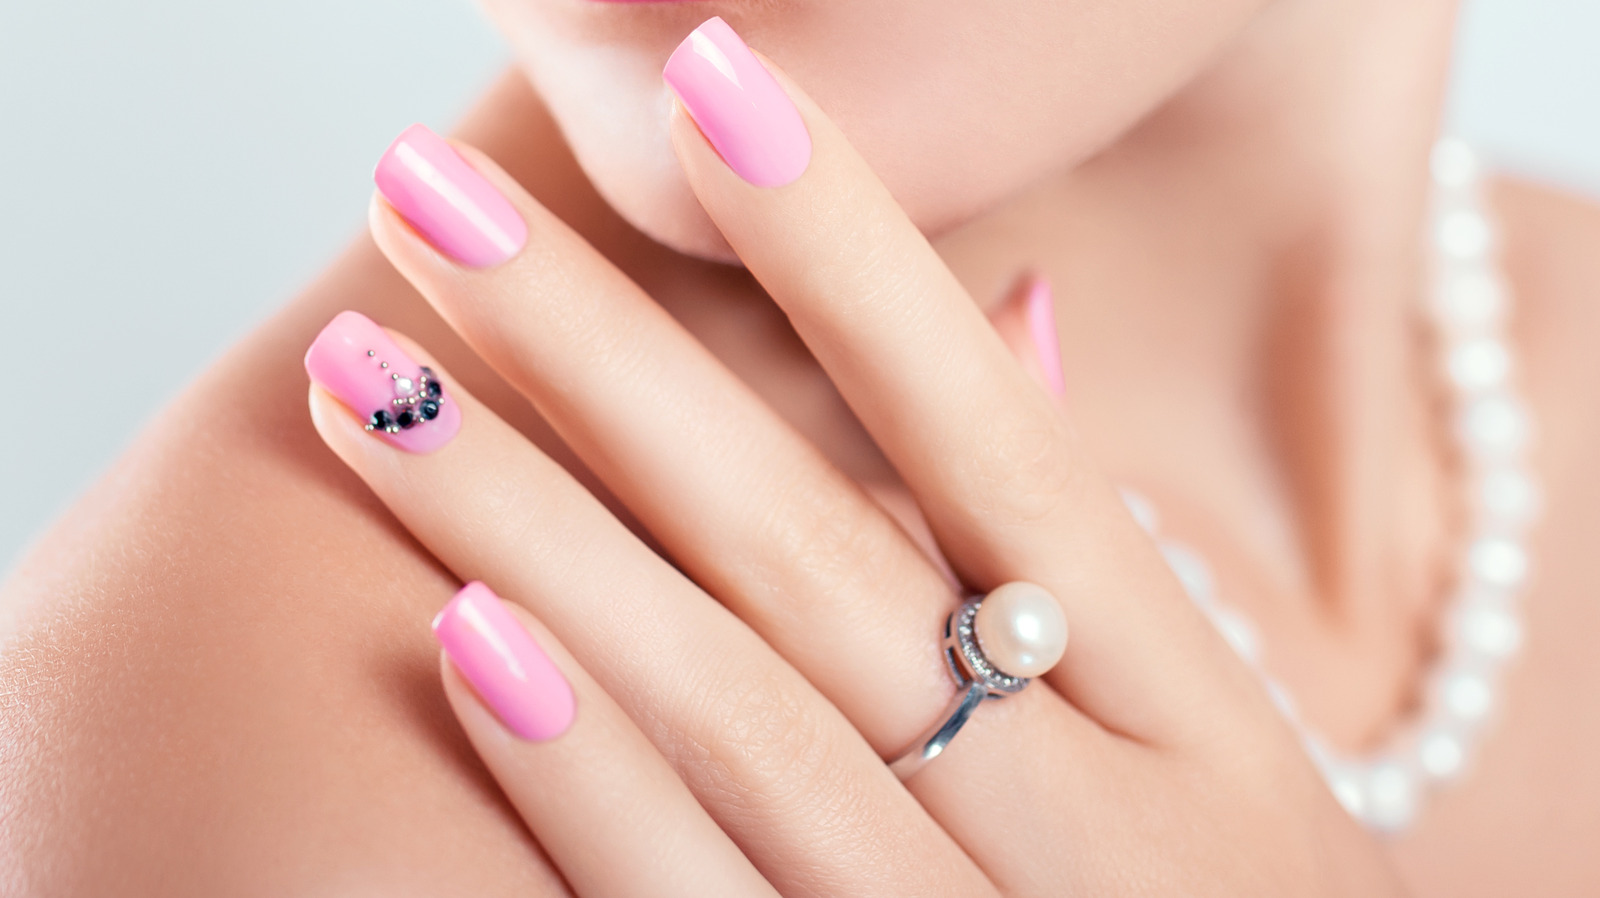 2. "50 Stunning Accent Nail Designs to Spice Up Your Manicure" - wide 6